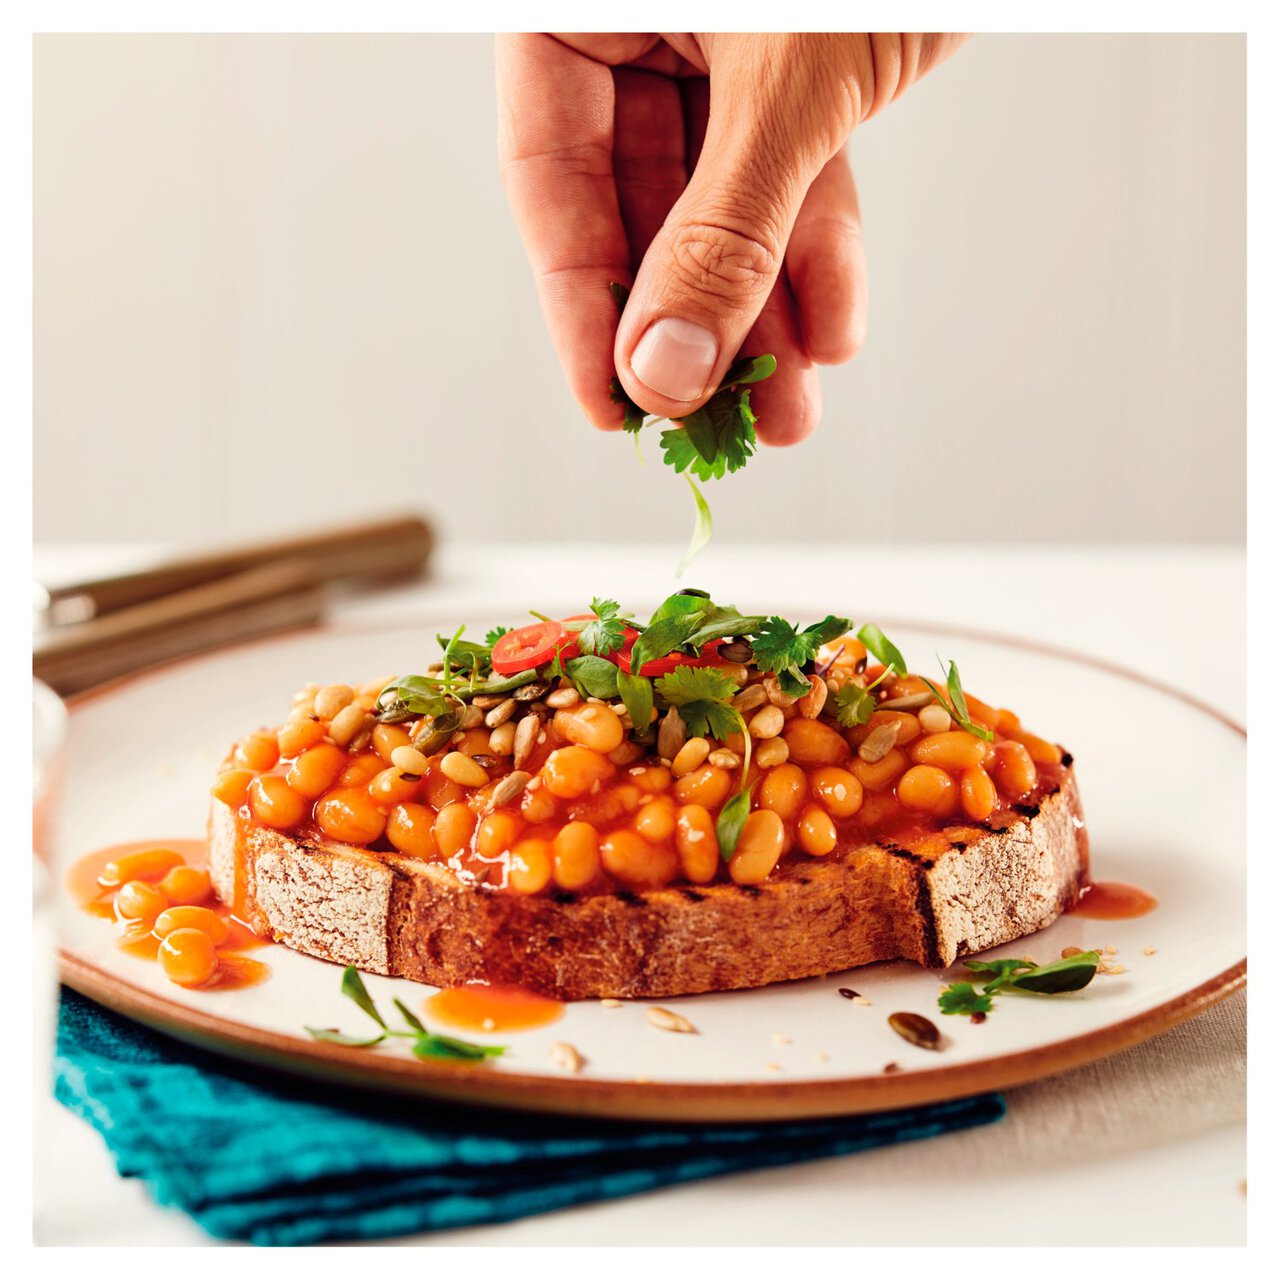 Heinz Baked Beans in a Rich Tomato Sauce 6 x 415g 6 x 415g